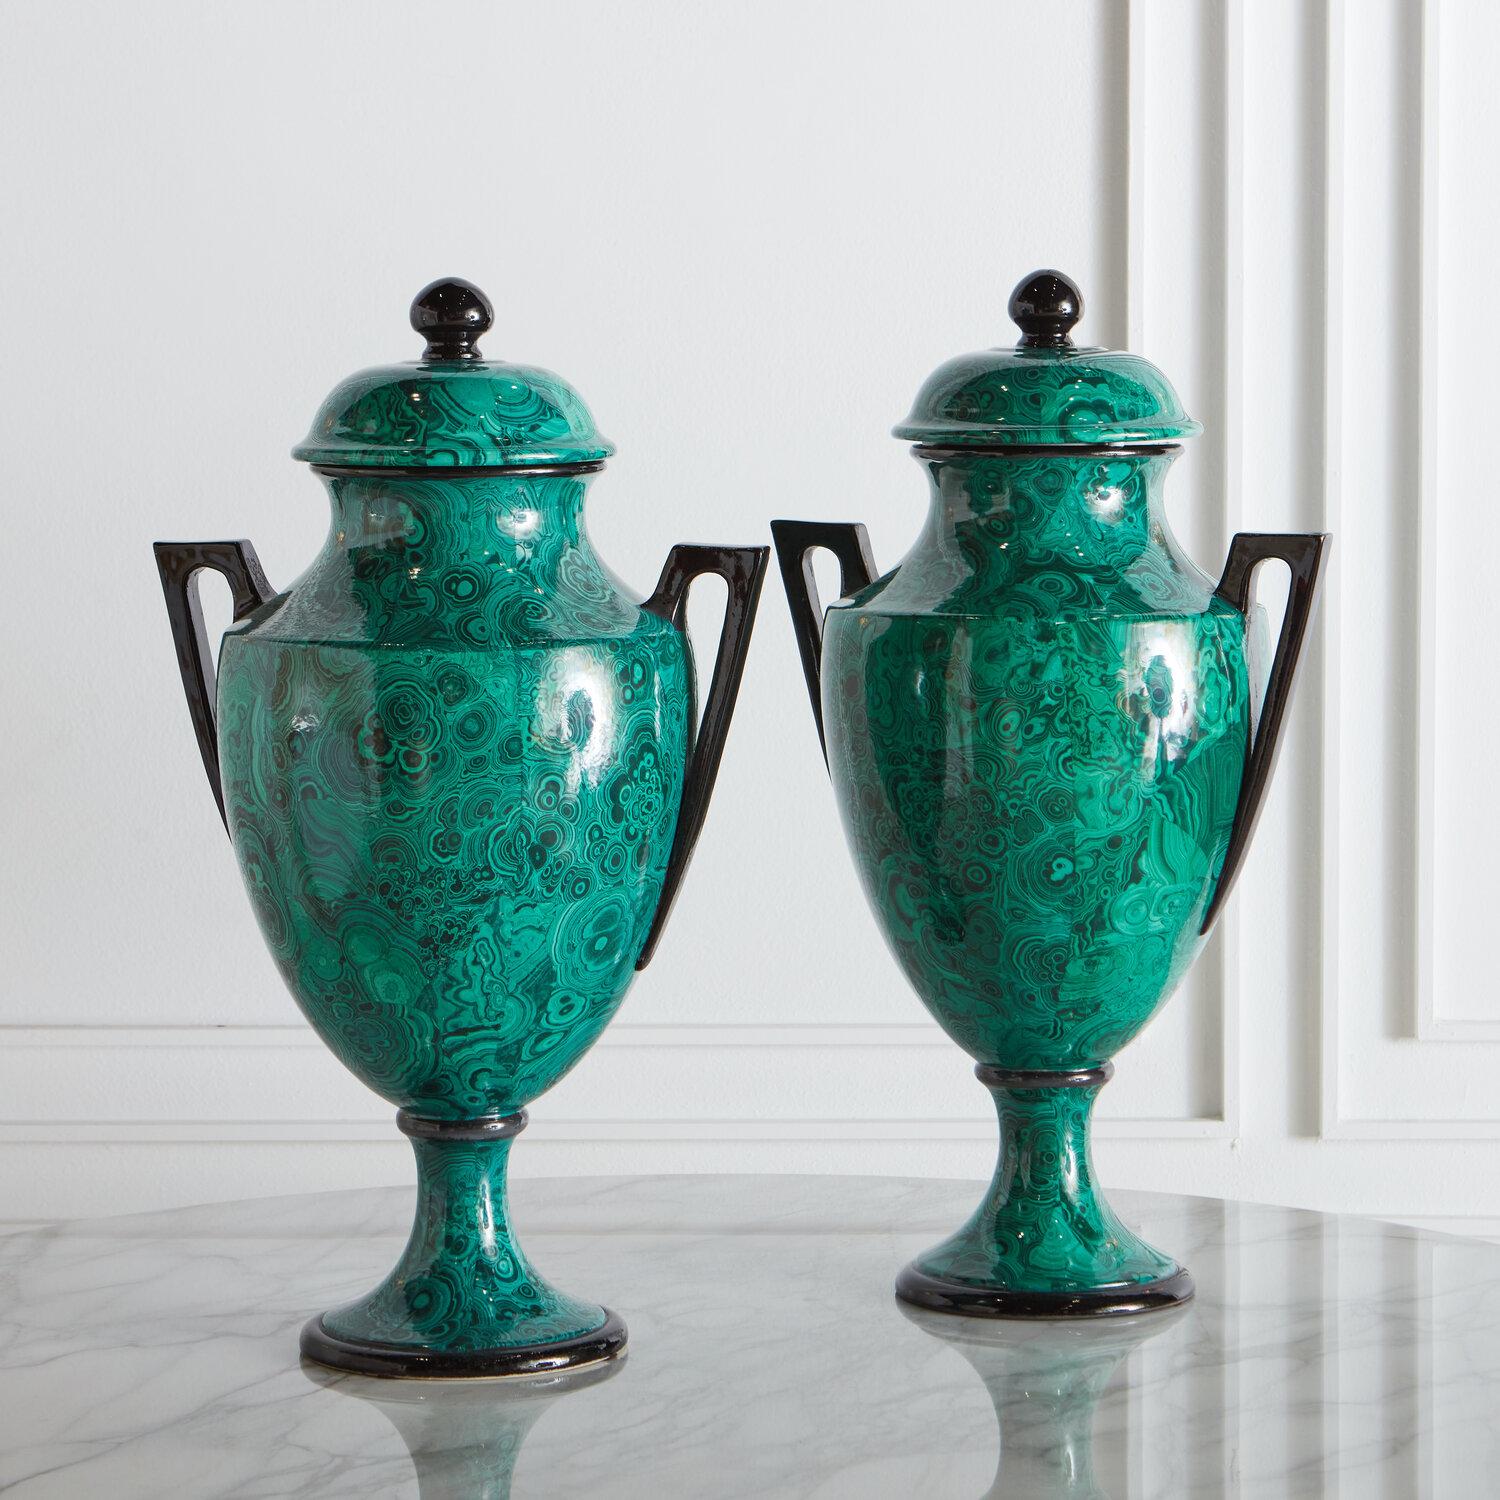 A stately and handsome pair of porcelain urns with Neoclassical motif handles and removable lid; marked “Italy” on underside. Circa 1980’s, Italy.